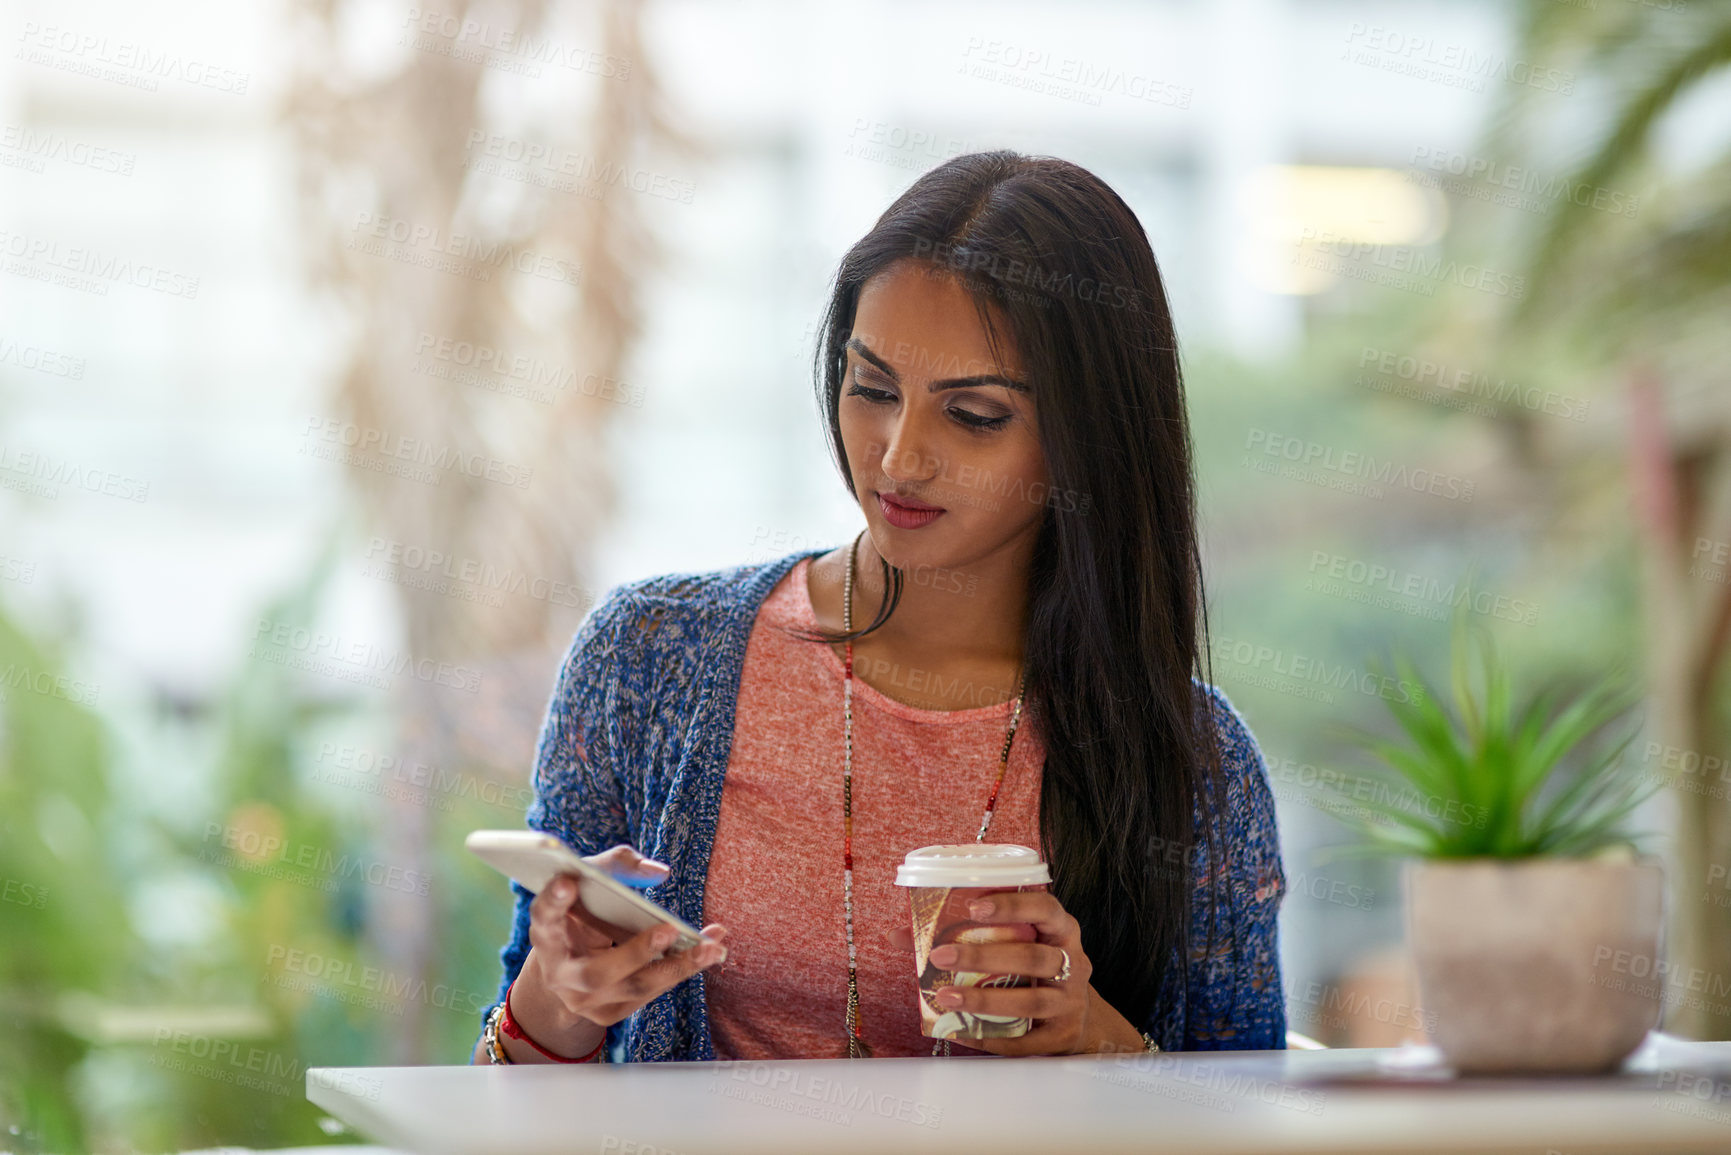 Buy stock photo Shot of an attractive young woman using her cellphone while drinking coffee in a coffee shop